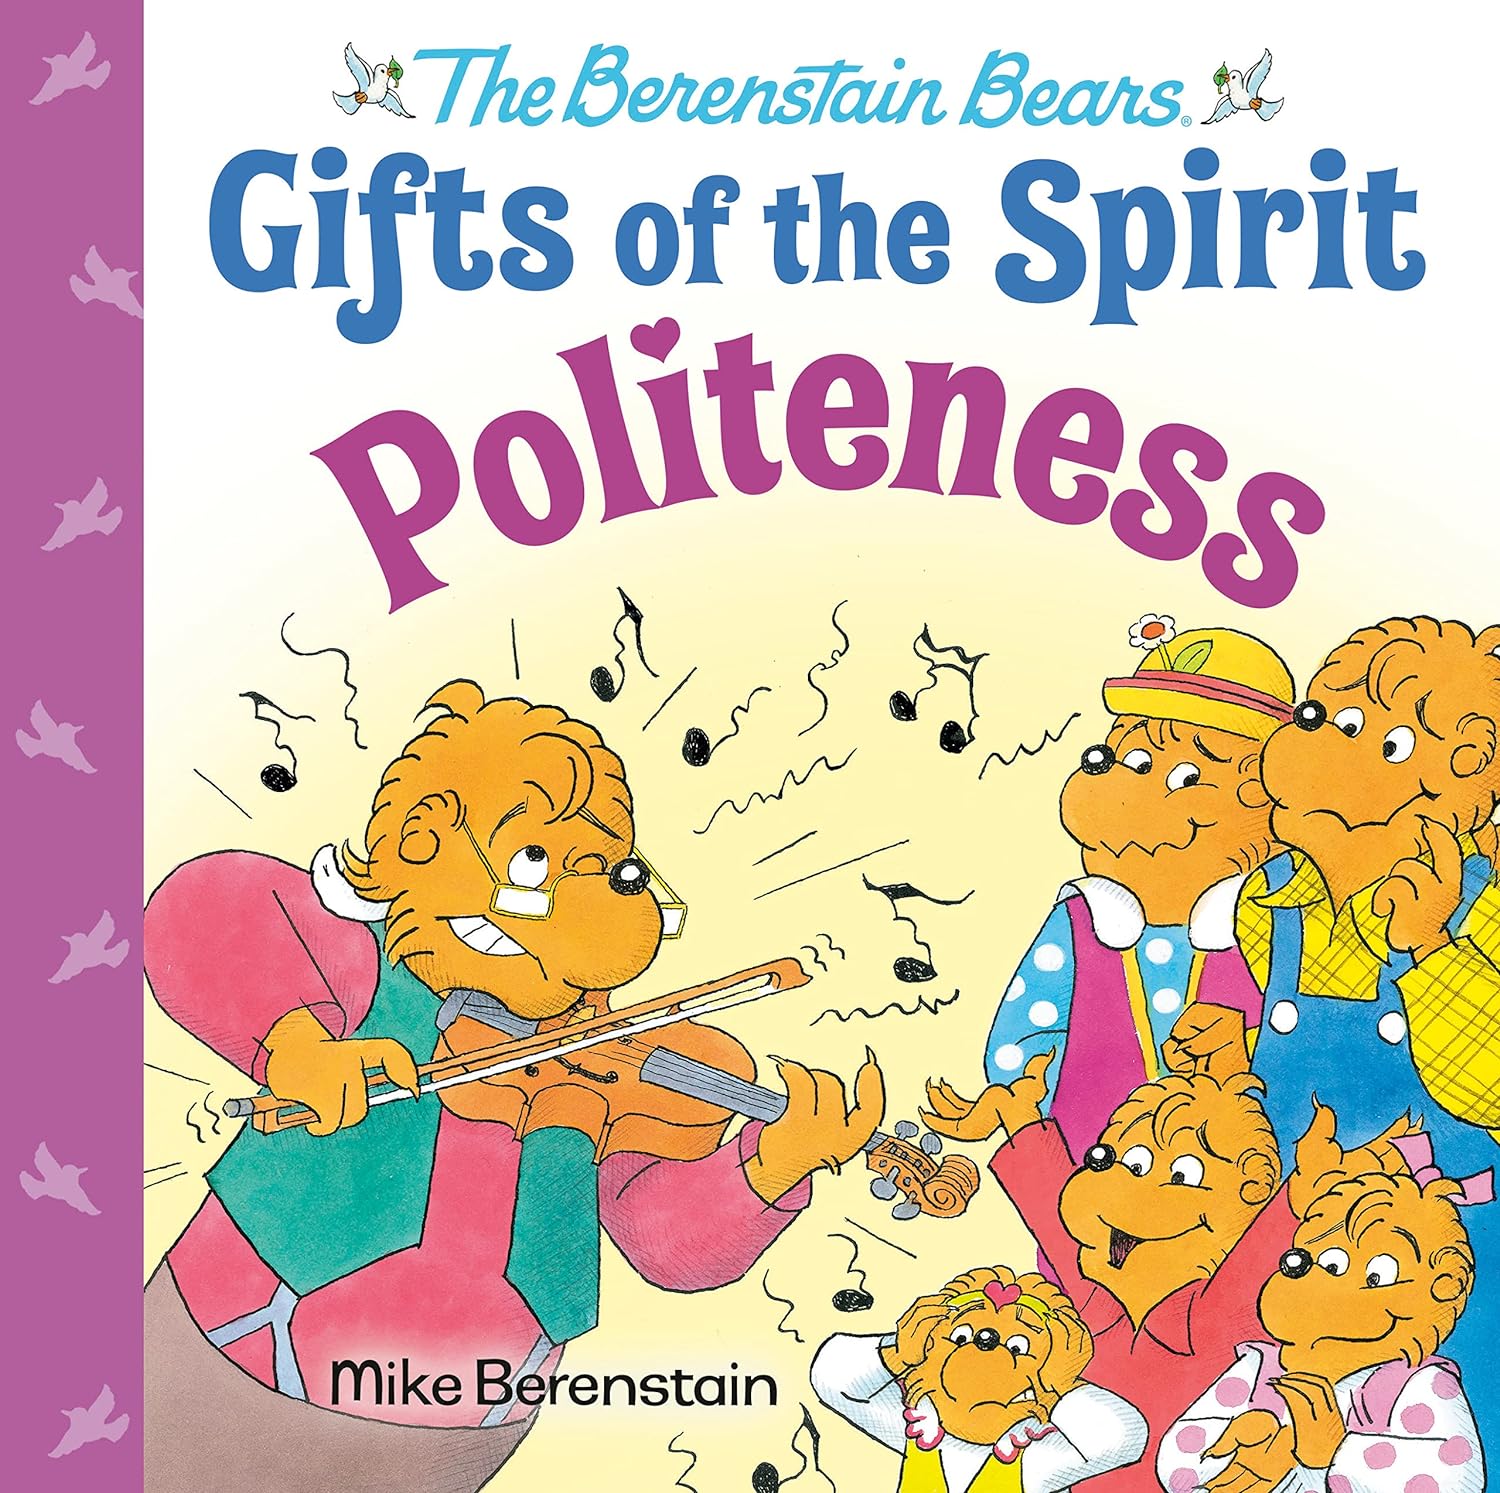 Politeness (Berenstain Bears Gifts of the Spirit)